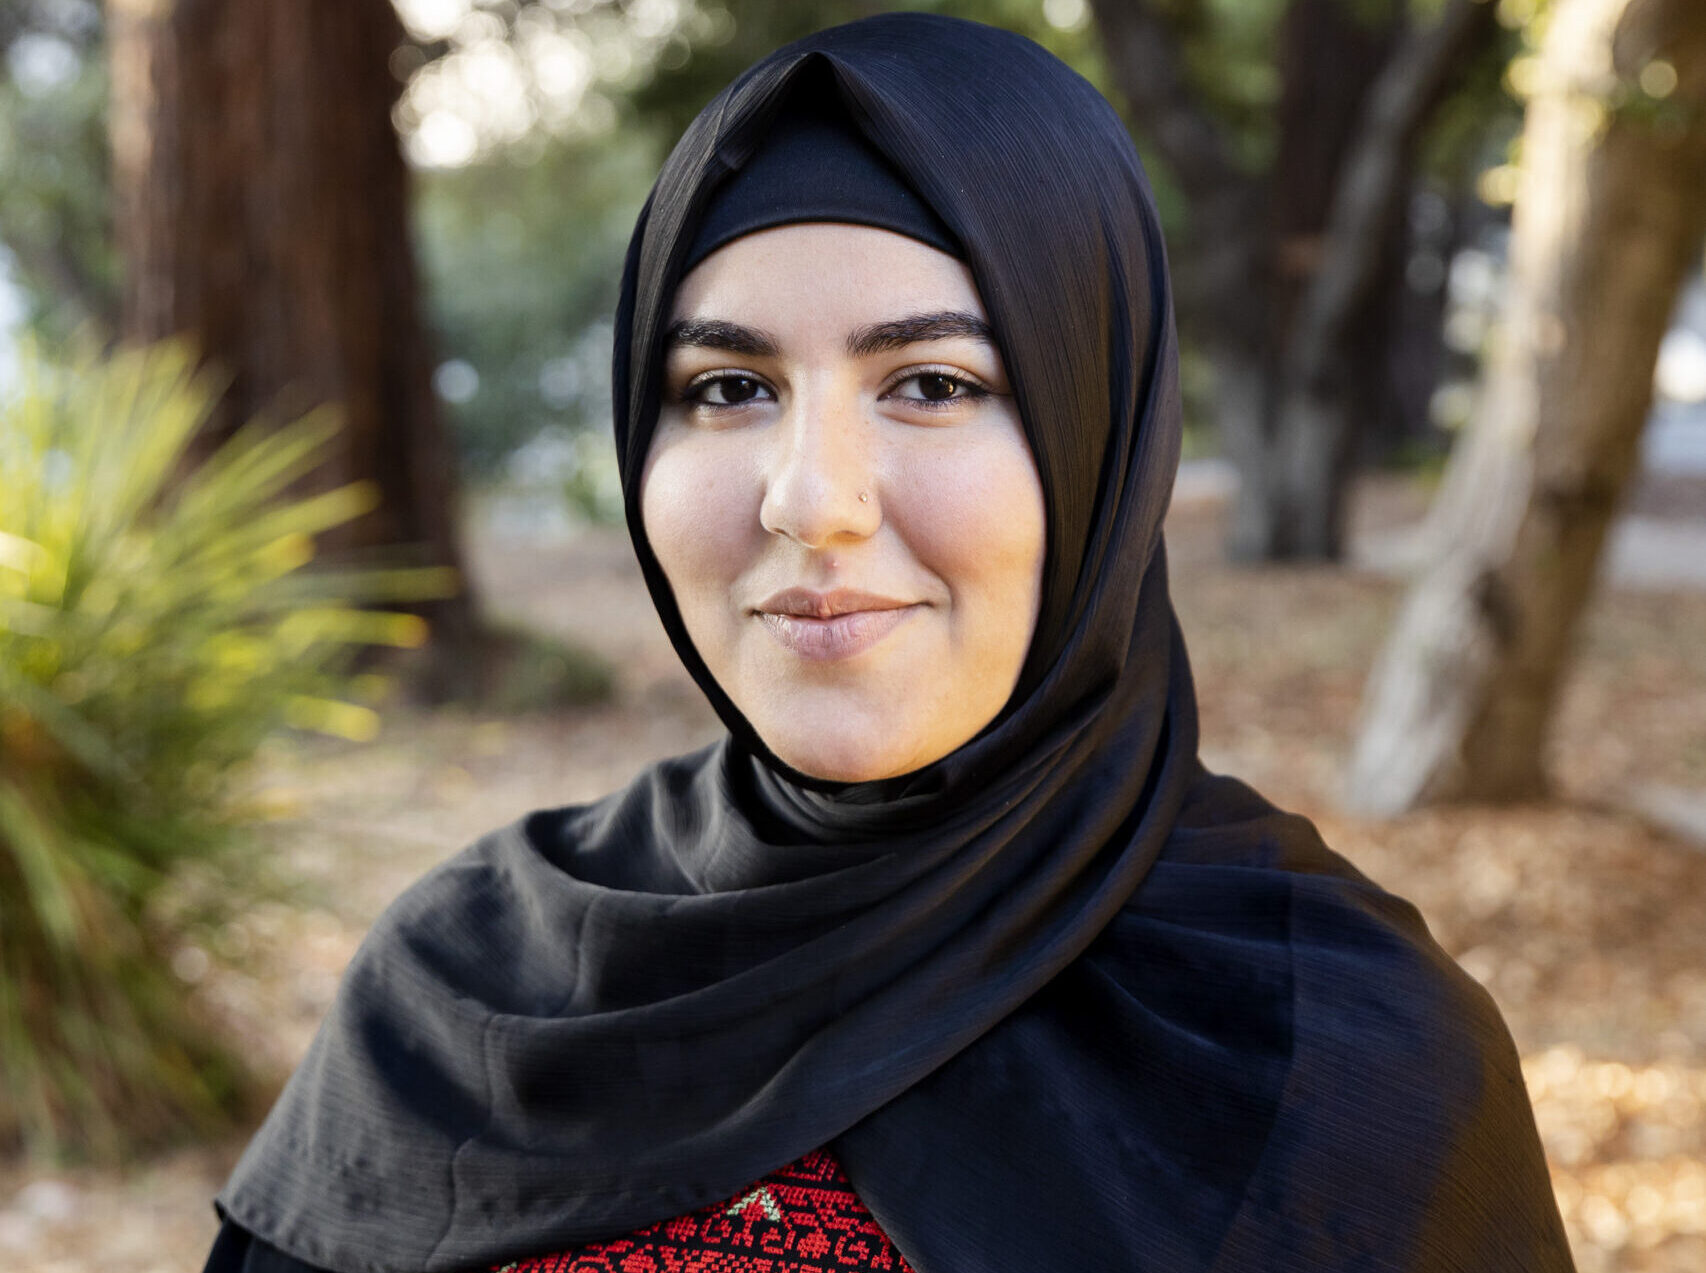 Portrait of a woman in a black hijab with a traditional Palestinian abaya with red stitching.